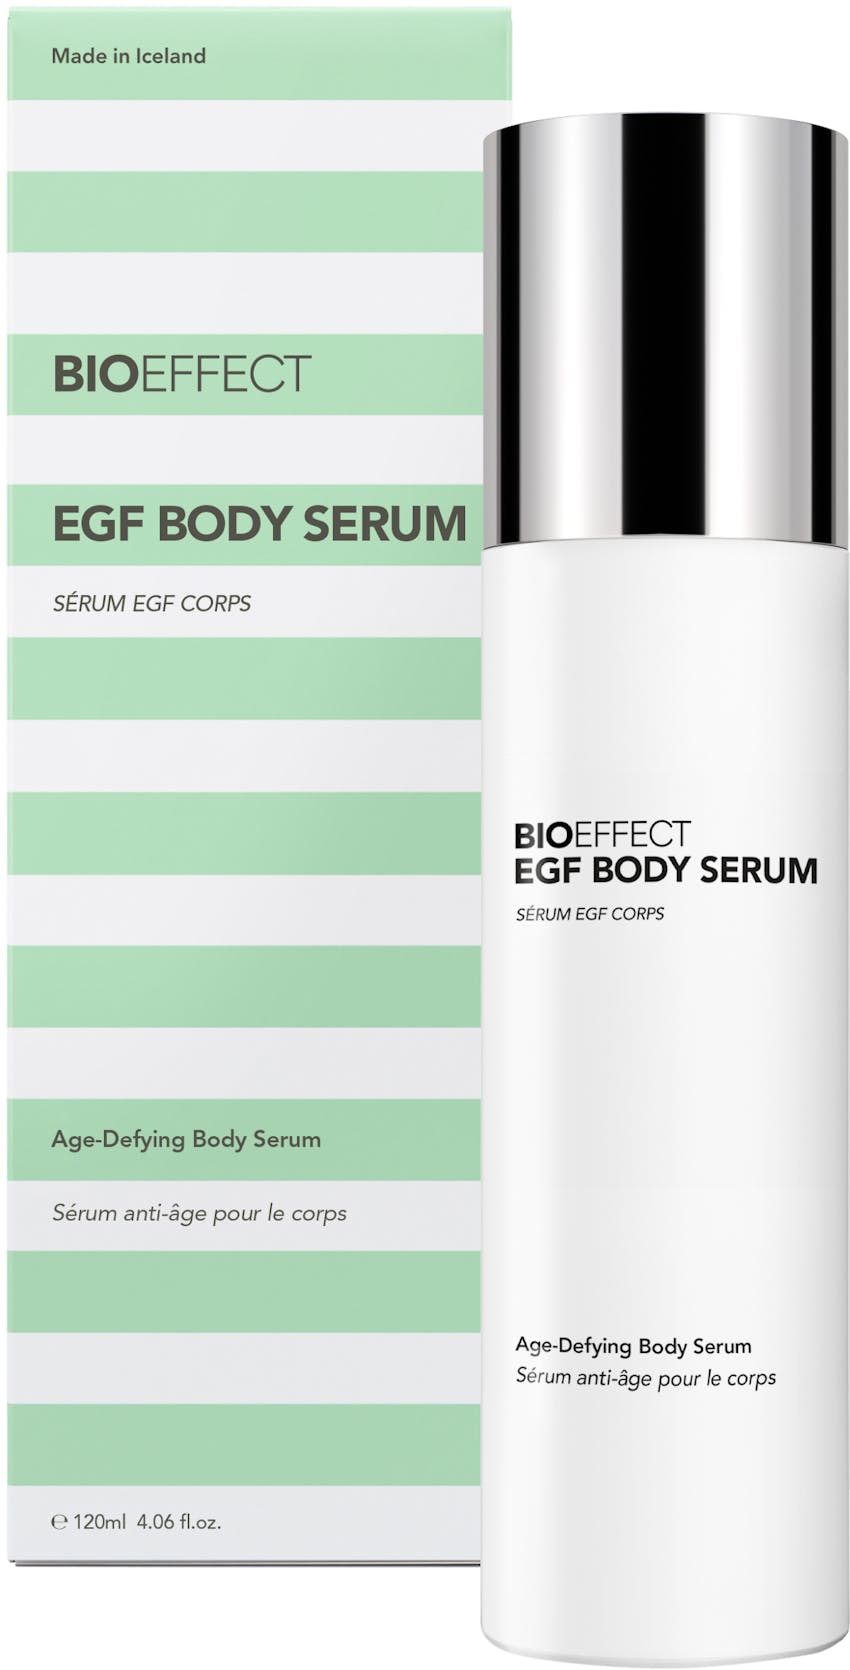 Green-and-white striped, rectangular-shaped package with a bottle of BIOEFFECT Growth Factor Skin Care Anti-Aging Body Serum to the right of the package.